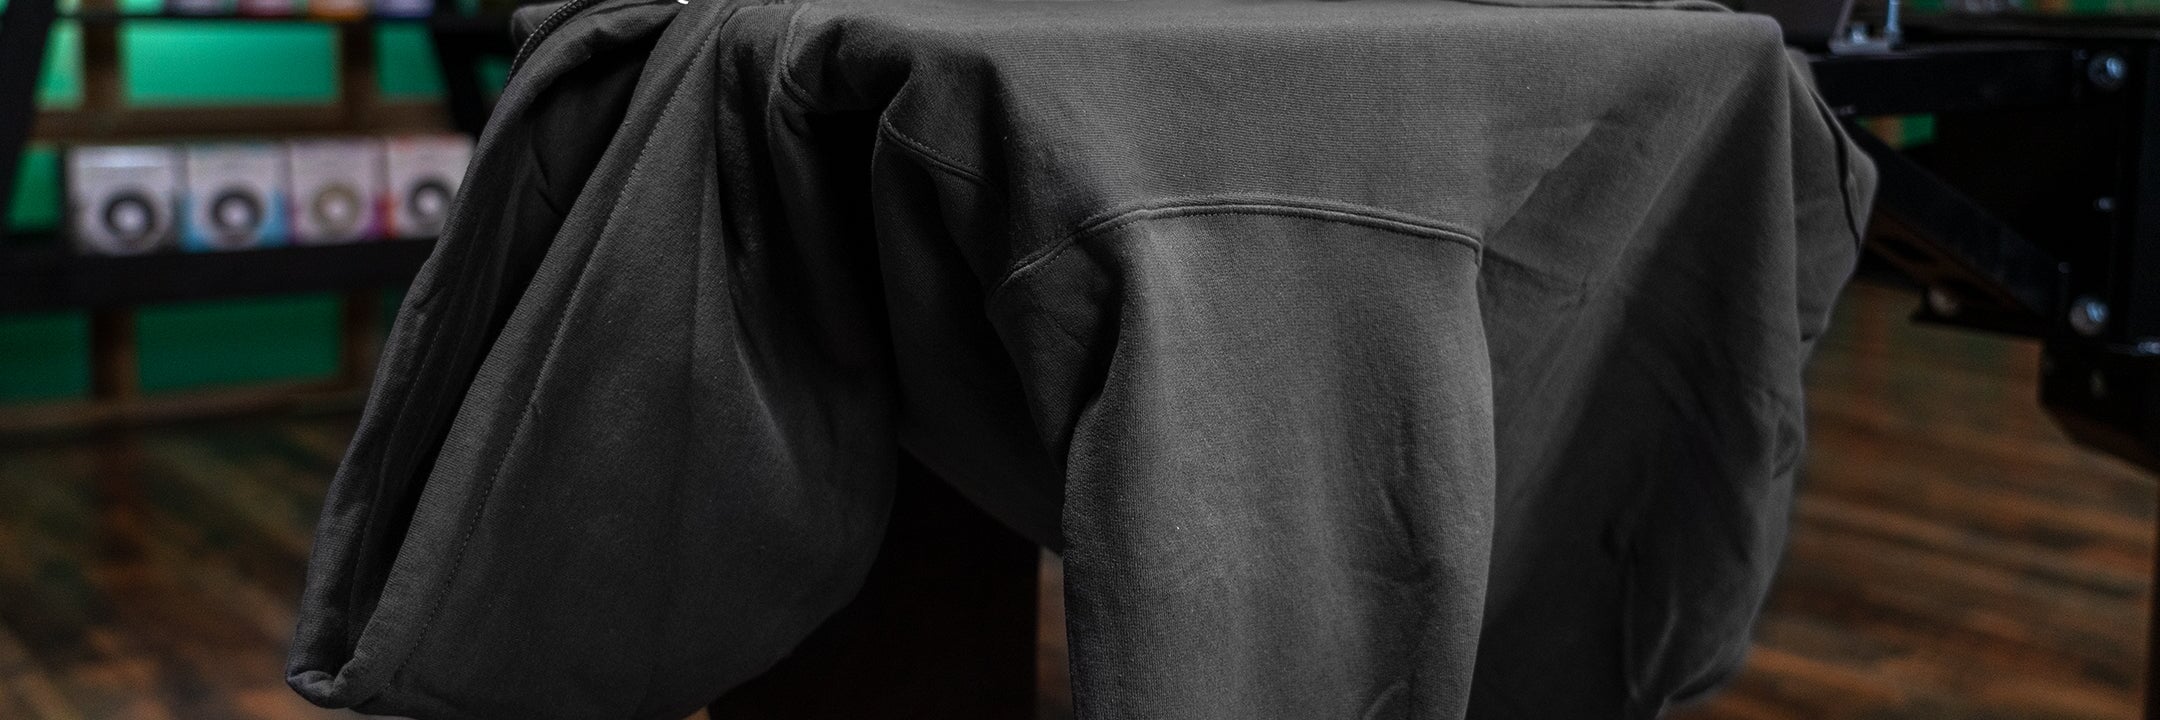 Hoodies Versus Sweatshirt: Style Differences Explained - The Manual